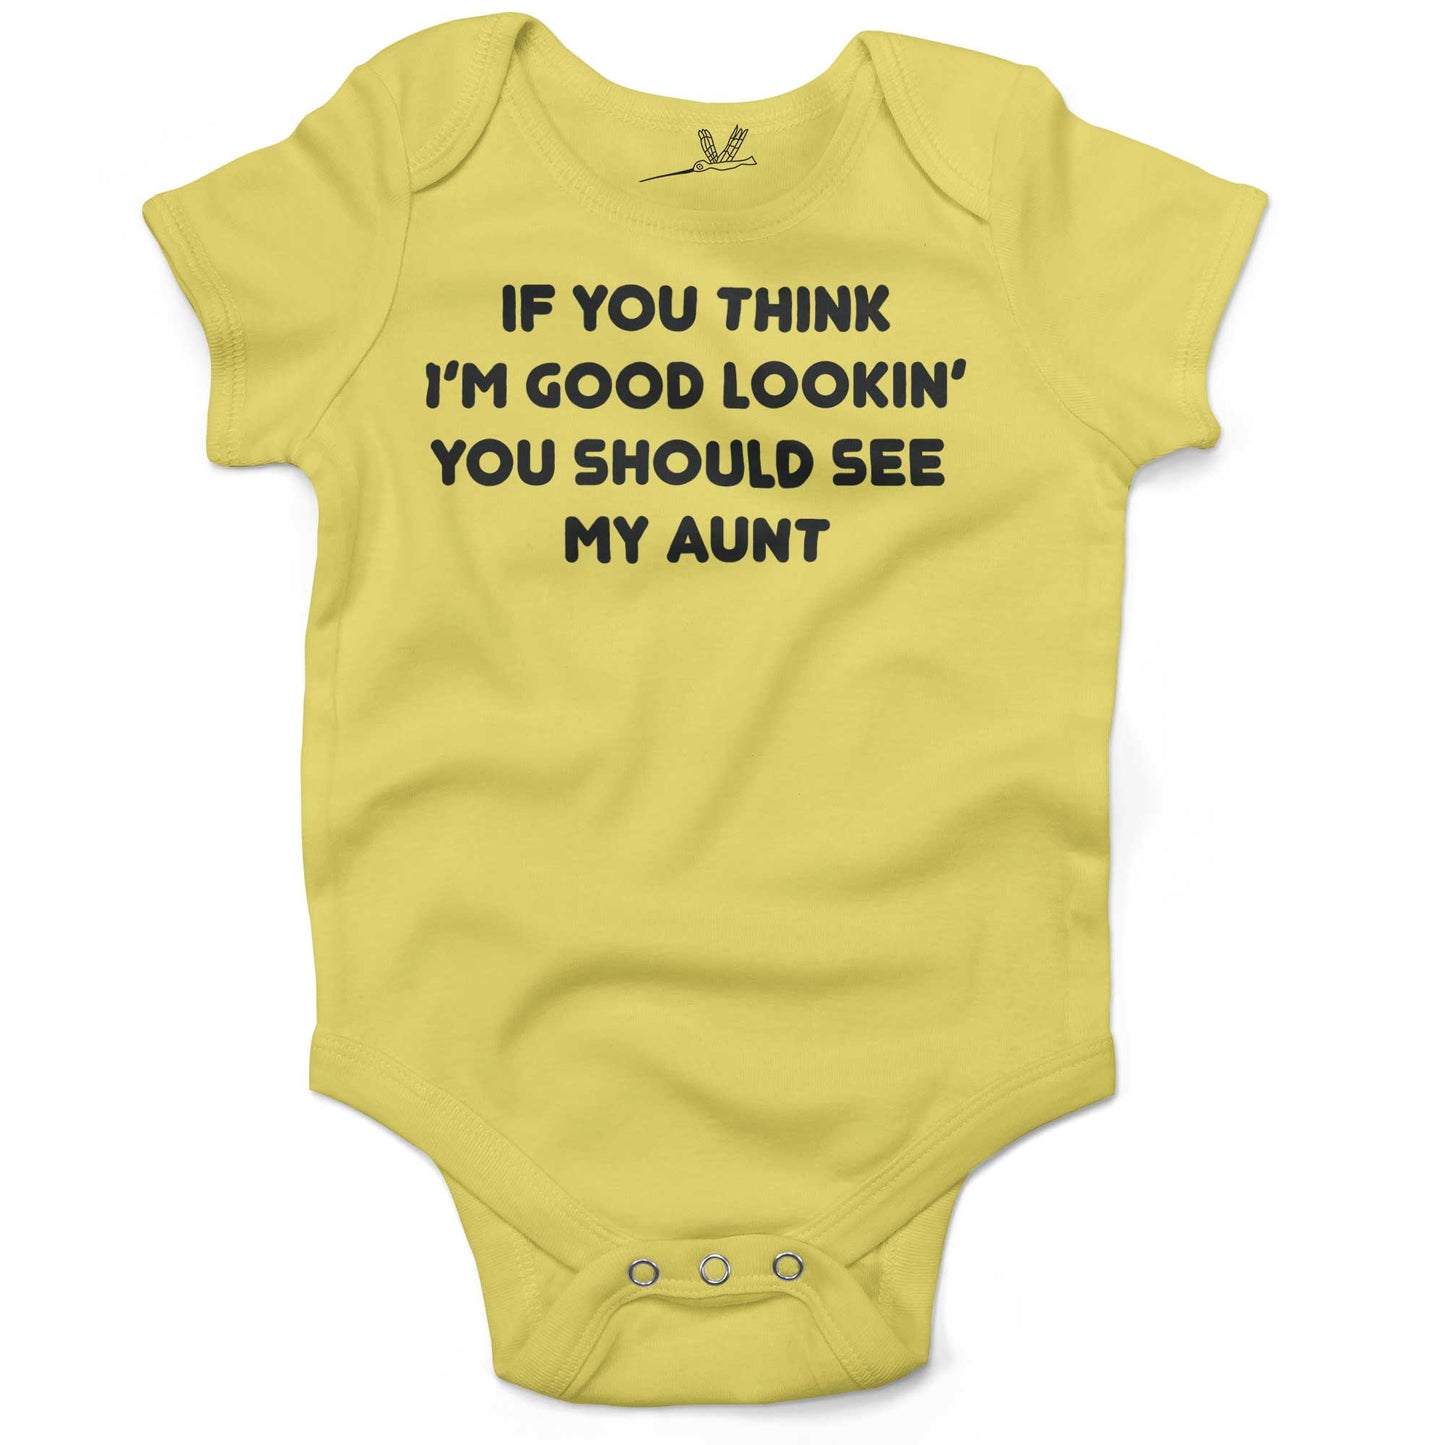 If You Think I'm Good Lookin' You Should See My Aunt Infant Bodysuit or Raglan Tee-Yellow-3-6 months